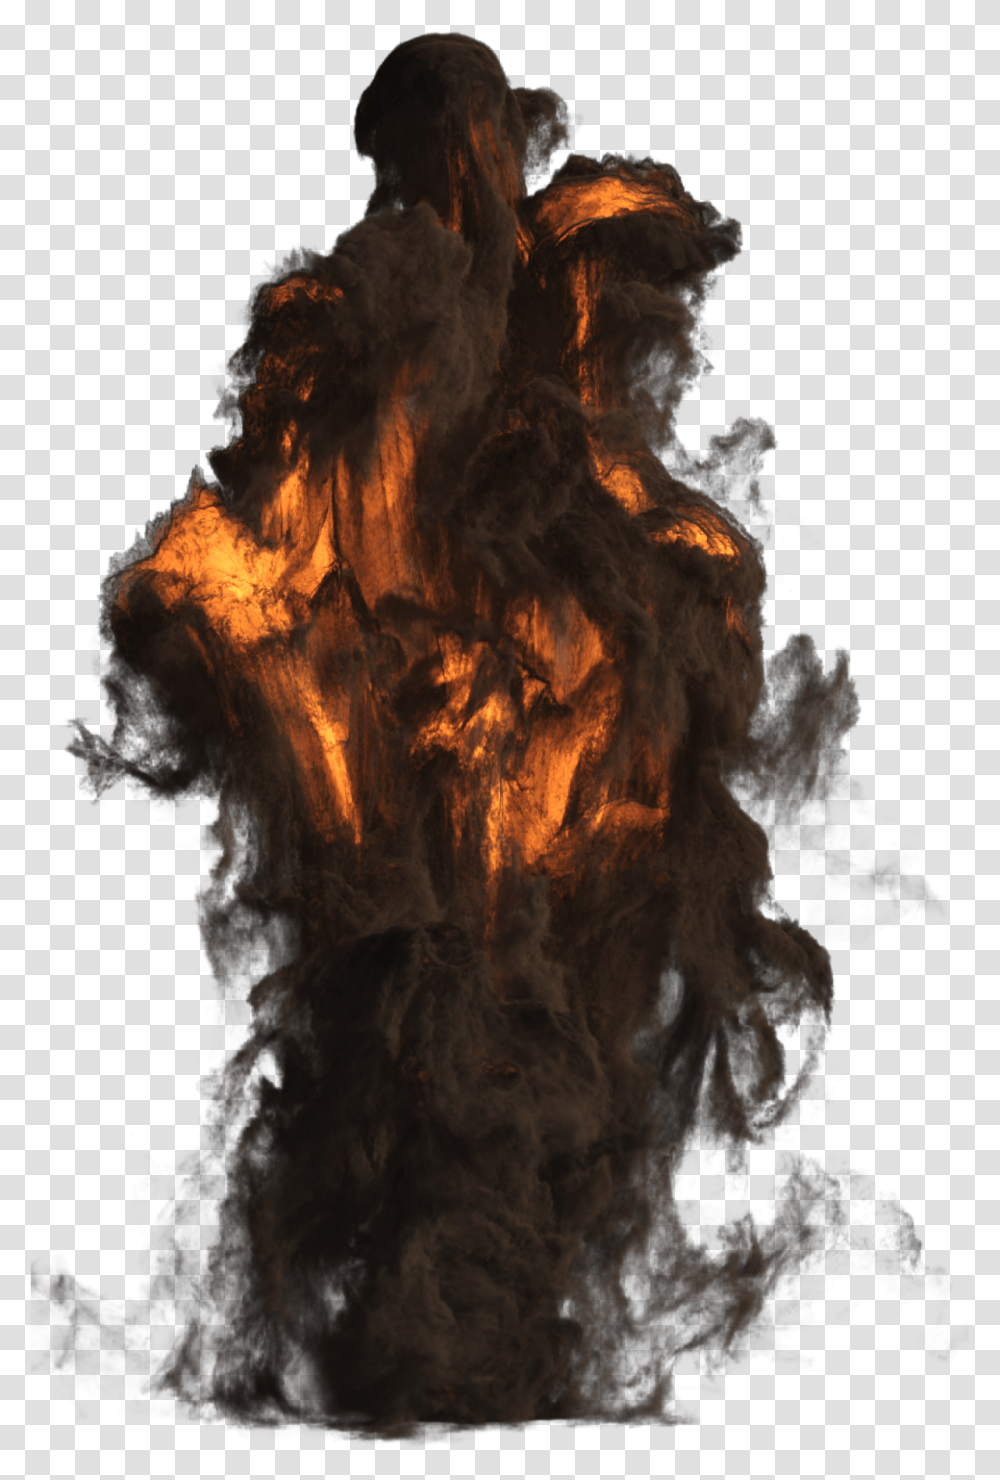 Fire And Smoke Image For Free Fire And Smoke, Flame, Bonfire, Painting, Art Transparent Png